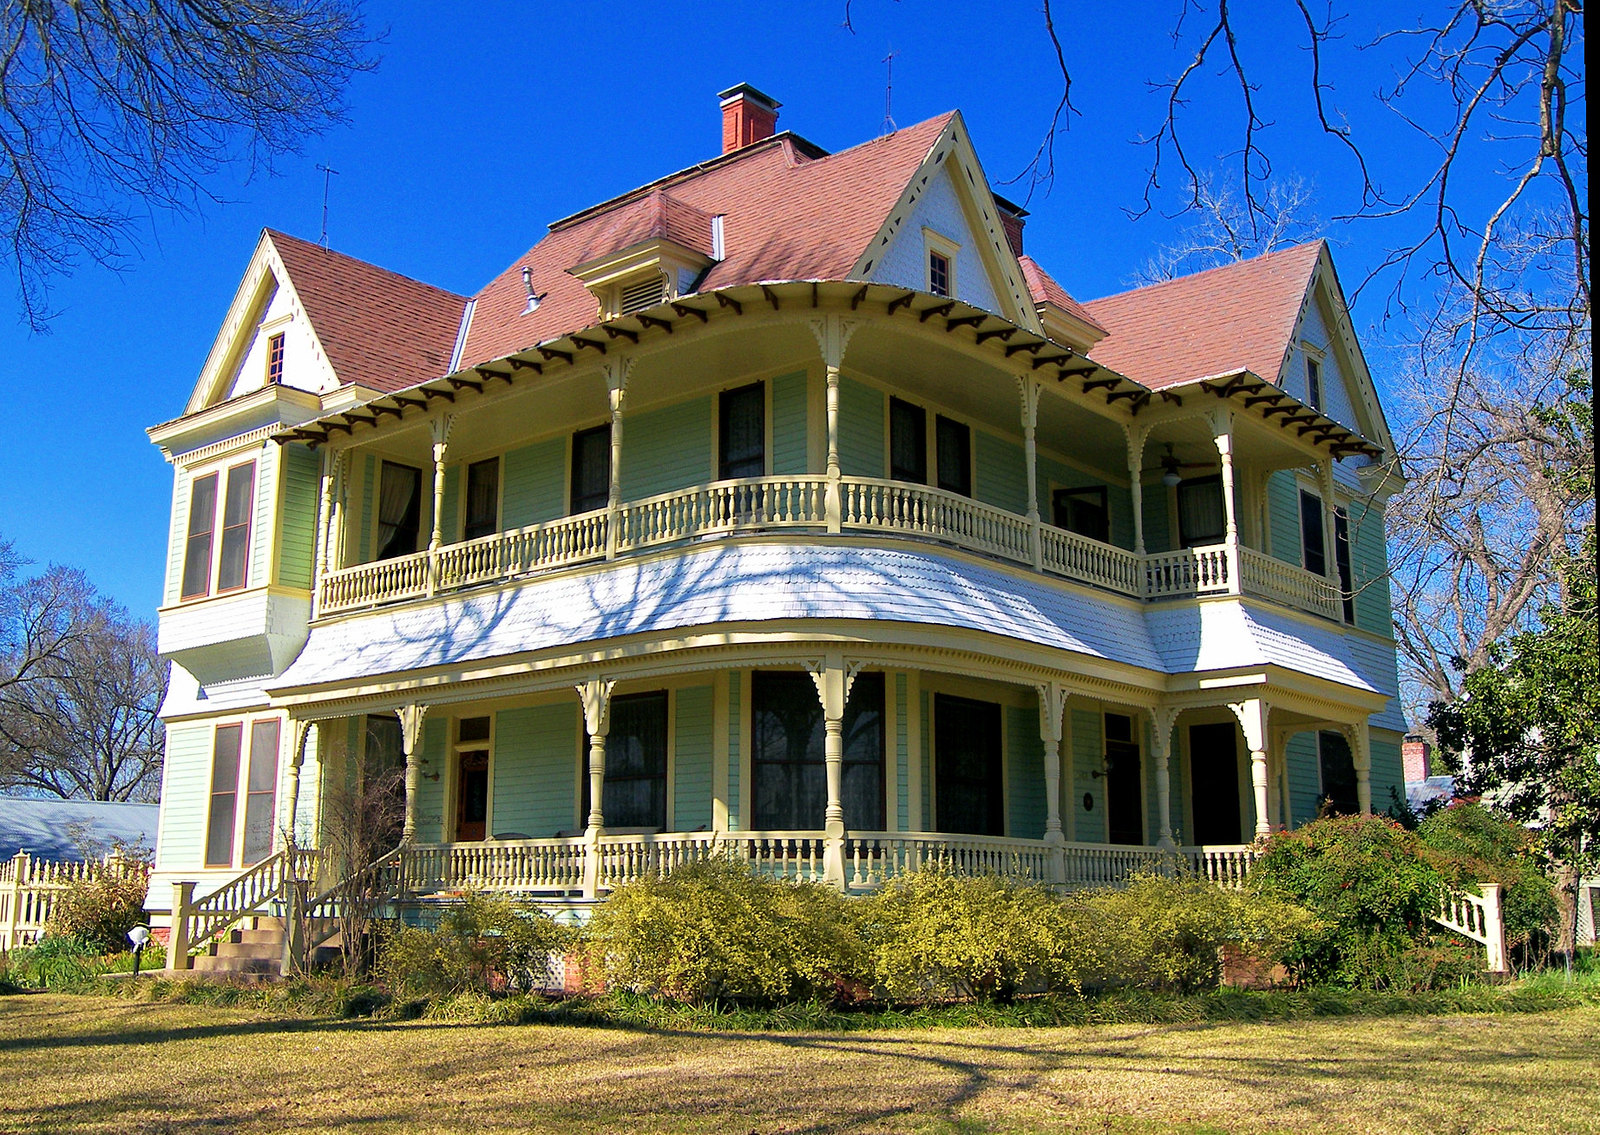 The H. P. Luckett House in Bastrop, Texas. Credit Larry D. Moore